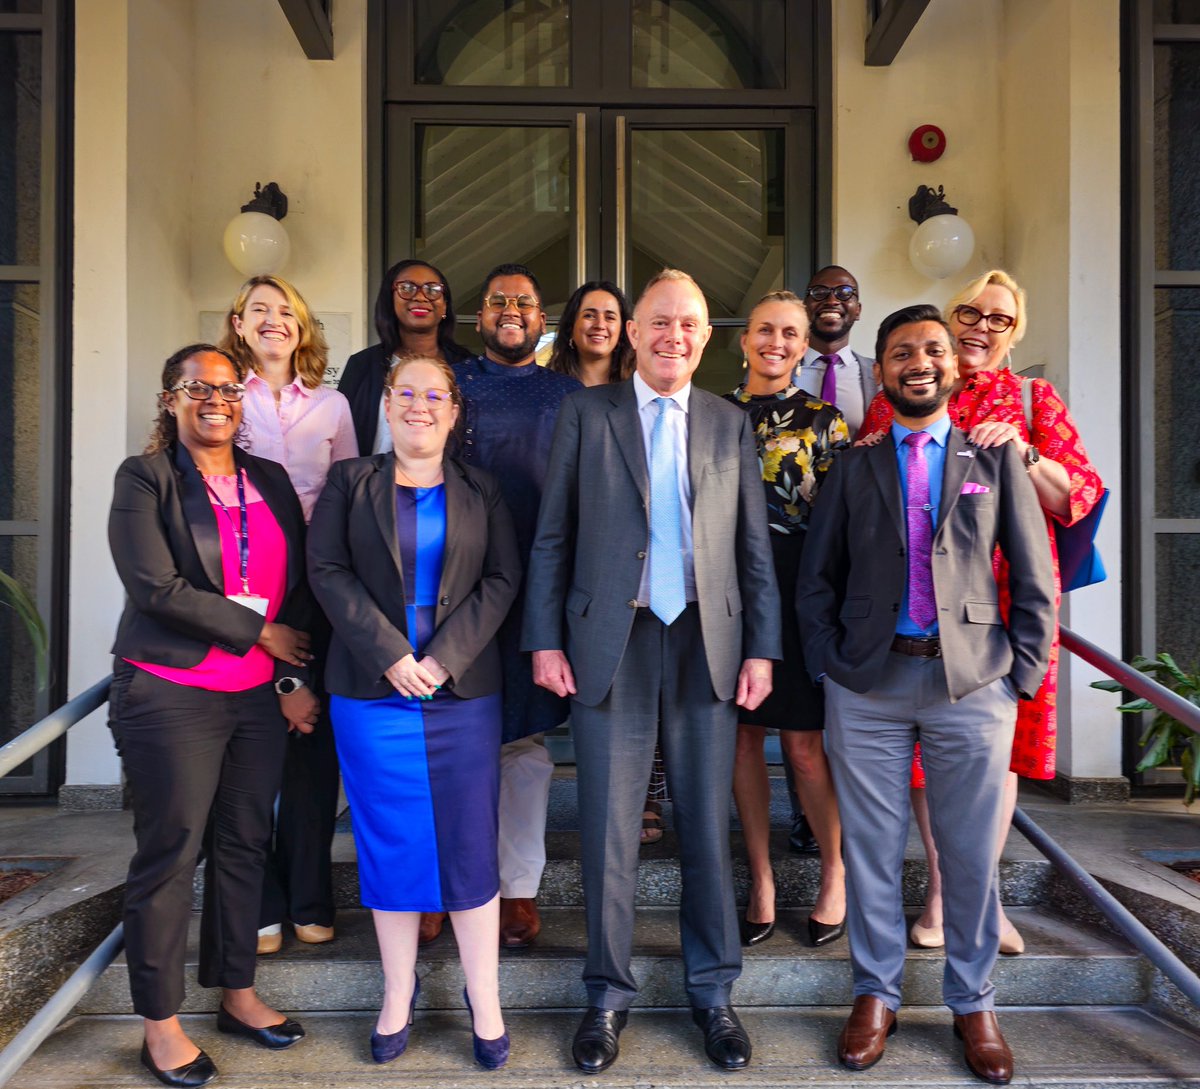 Huge thanks to representatives from the private sector and civil society who came together to discuss equality with 🇬🇧 PM’s Special Envoy for LGBT+ rights during his recent visit to Trinidad & Tobago. Your leadership is so inspiring!